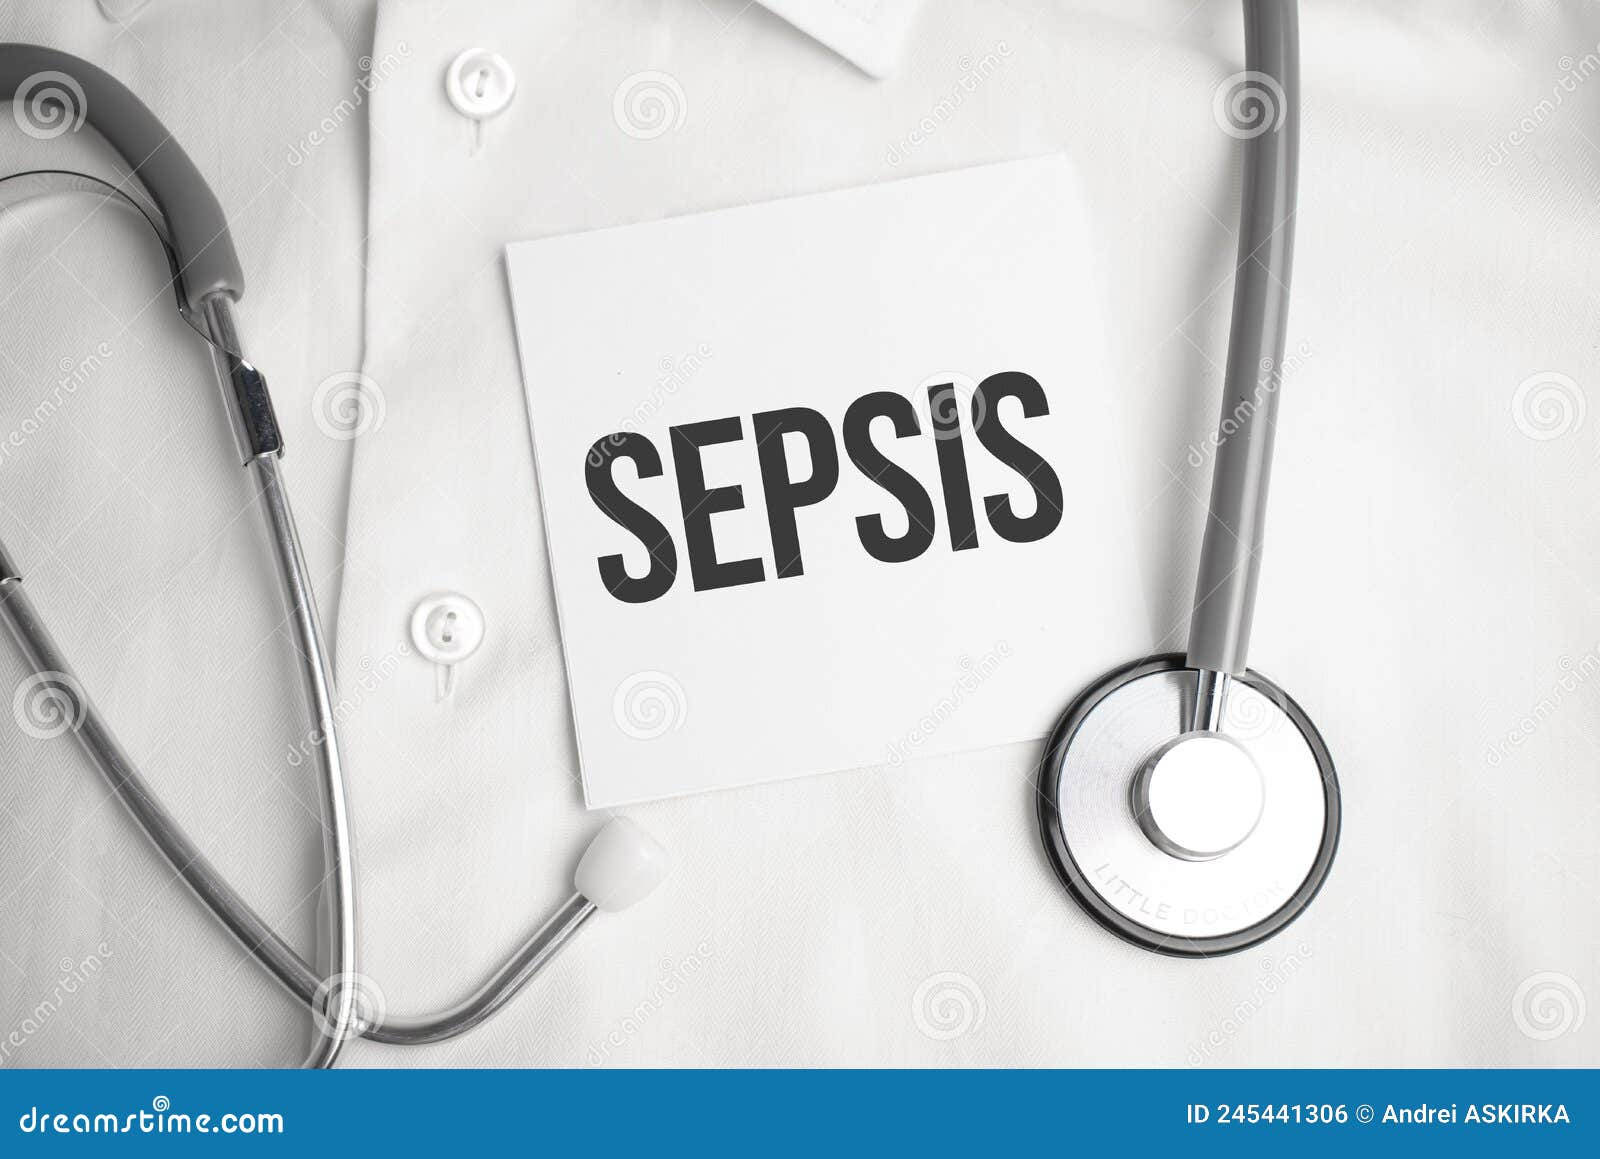 notebook with text sepsis with pen and stethoscope, medicina